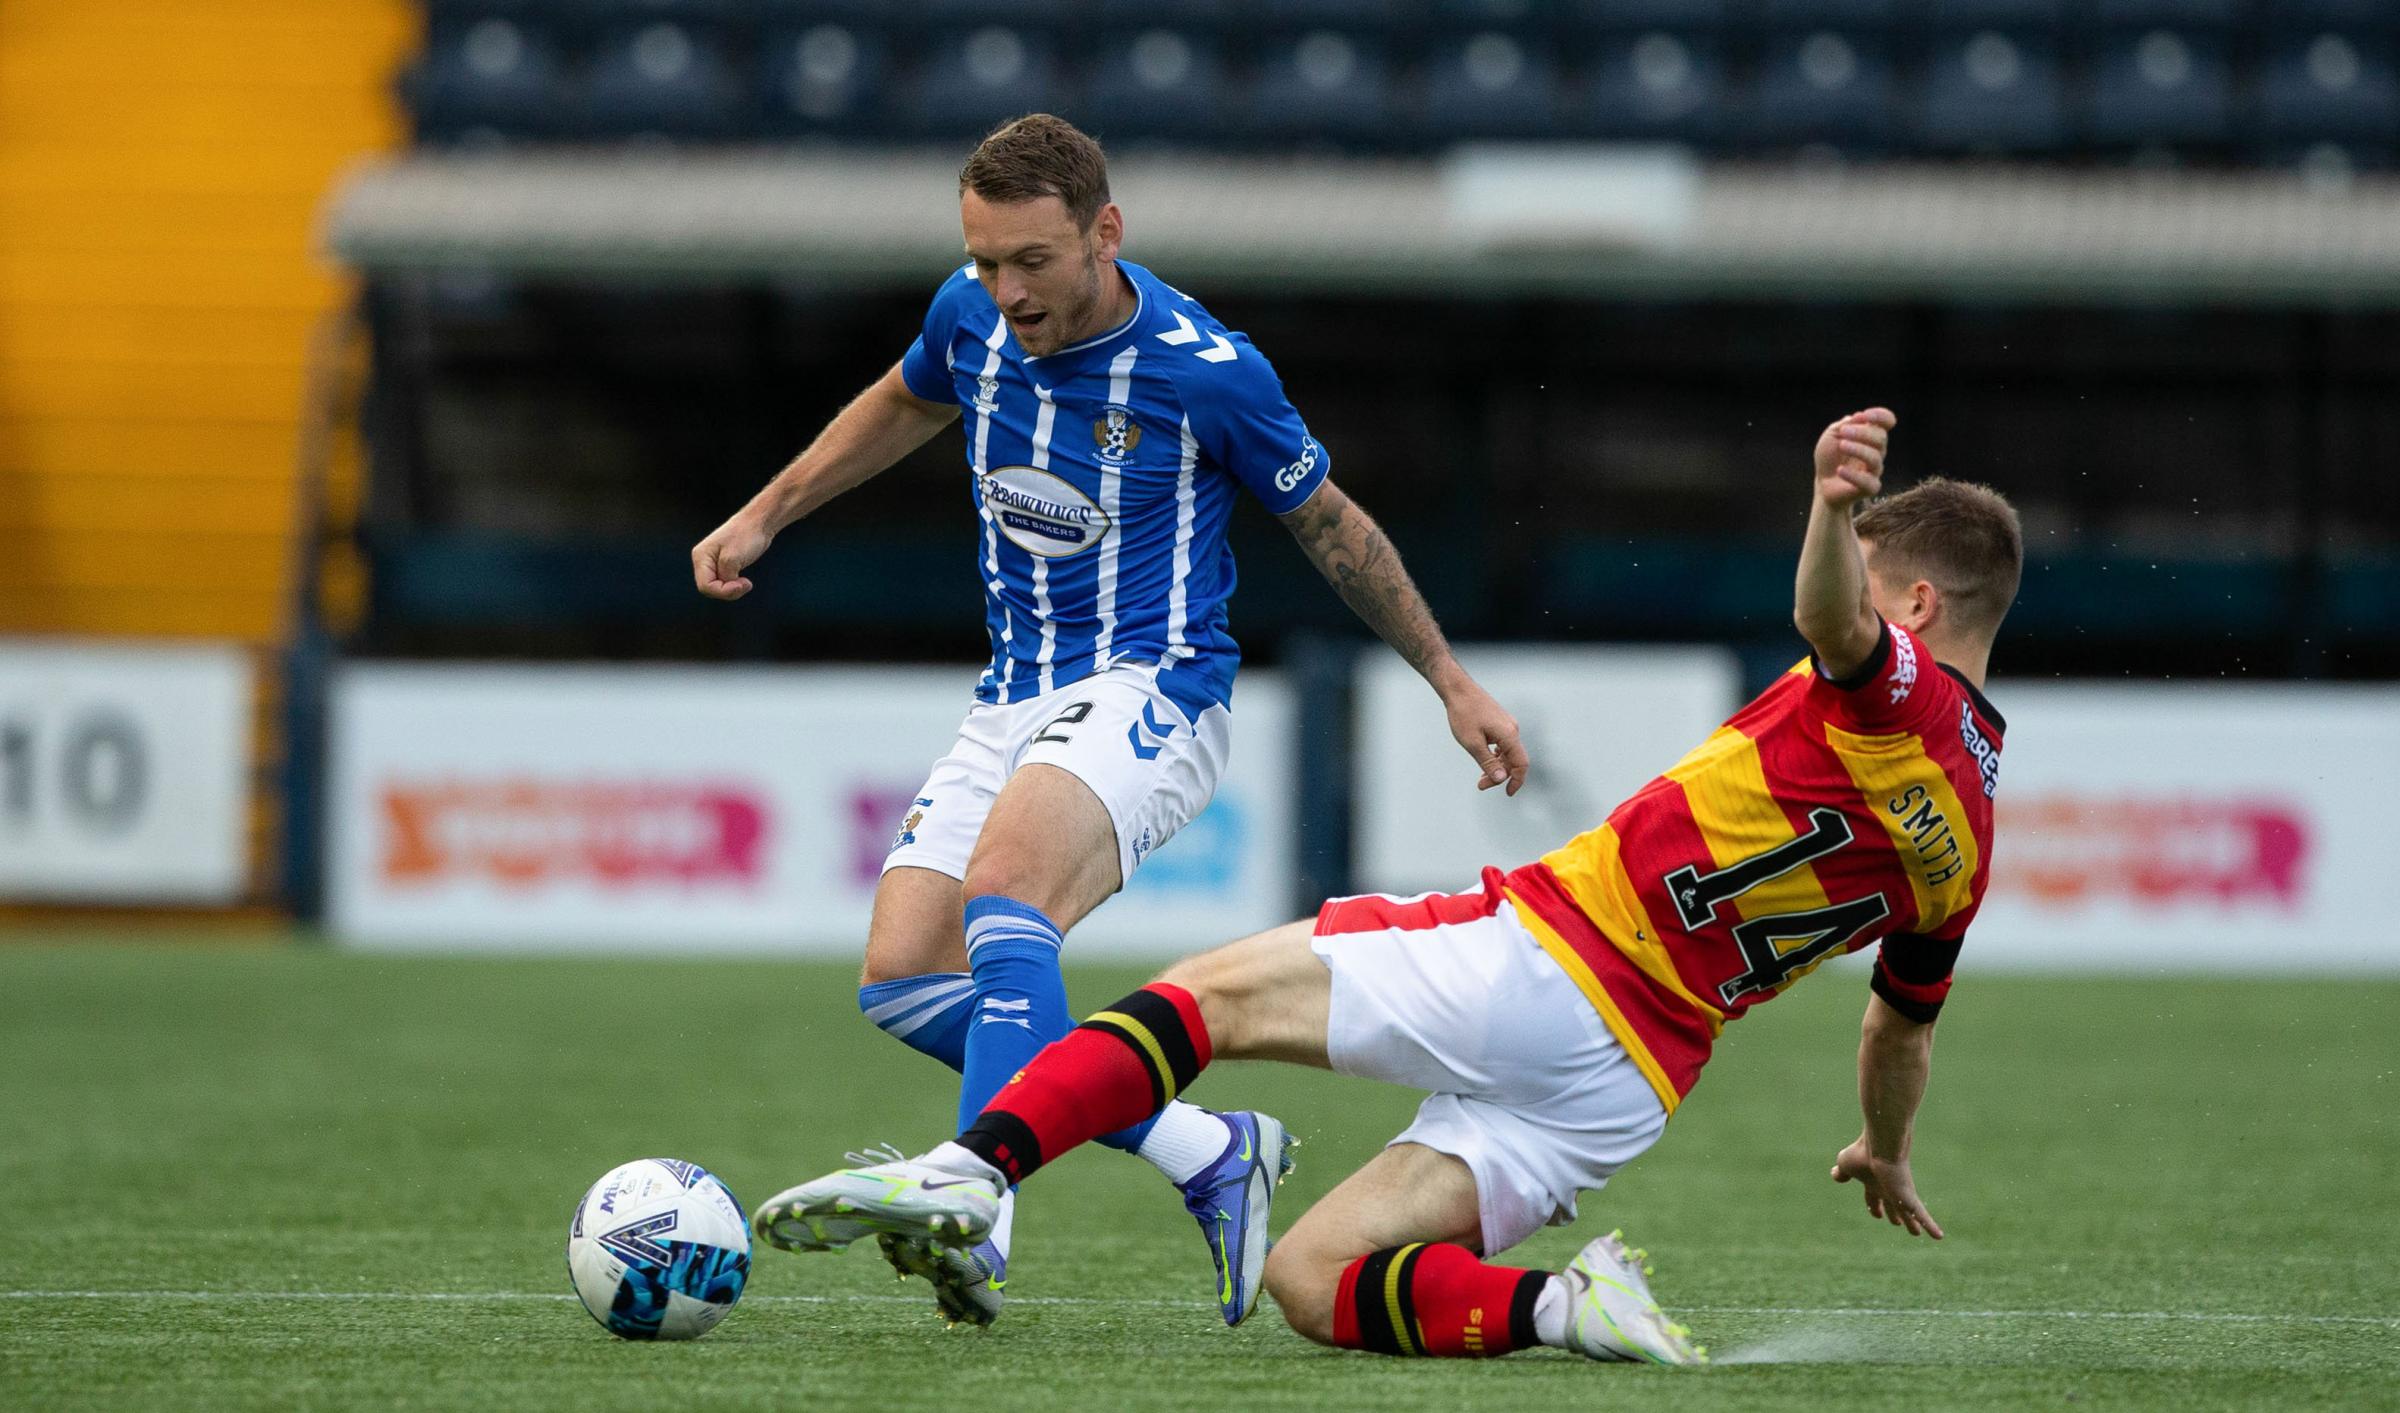 Lee Hodson targeting back-to-back titles after joining Jags on loan